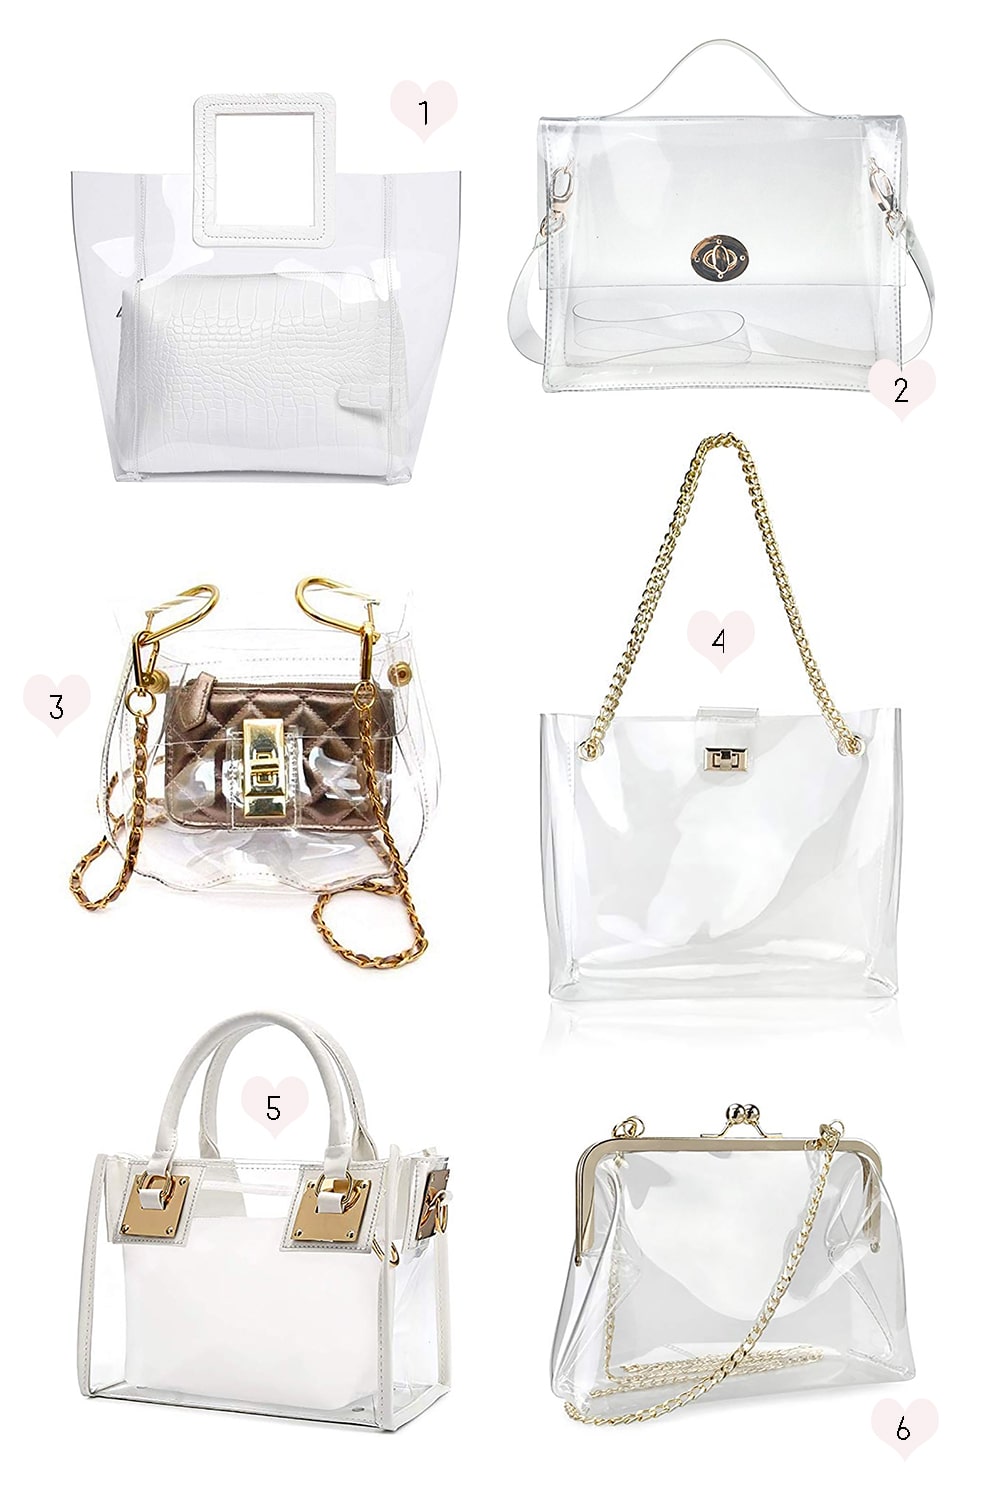 Affordable fashion blogger Stephanie Ziajka of Diary of a Debutante rounds up 12 cute clear bags for football games